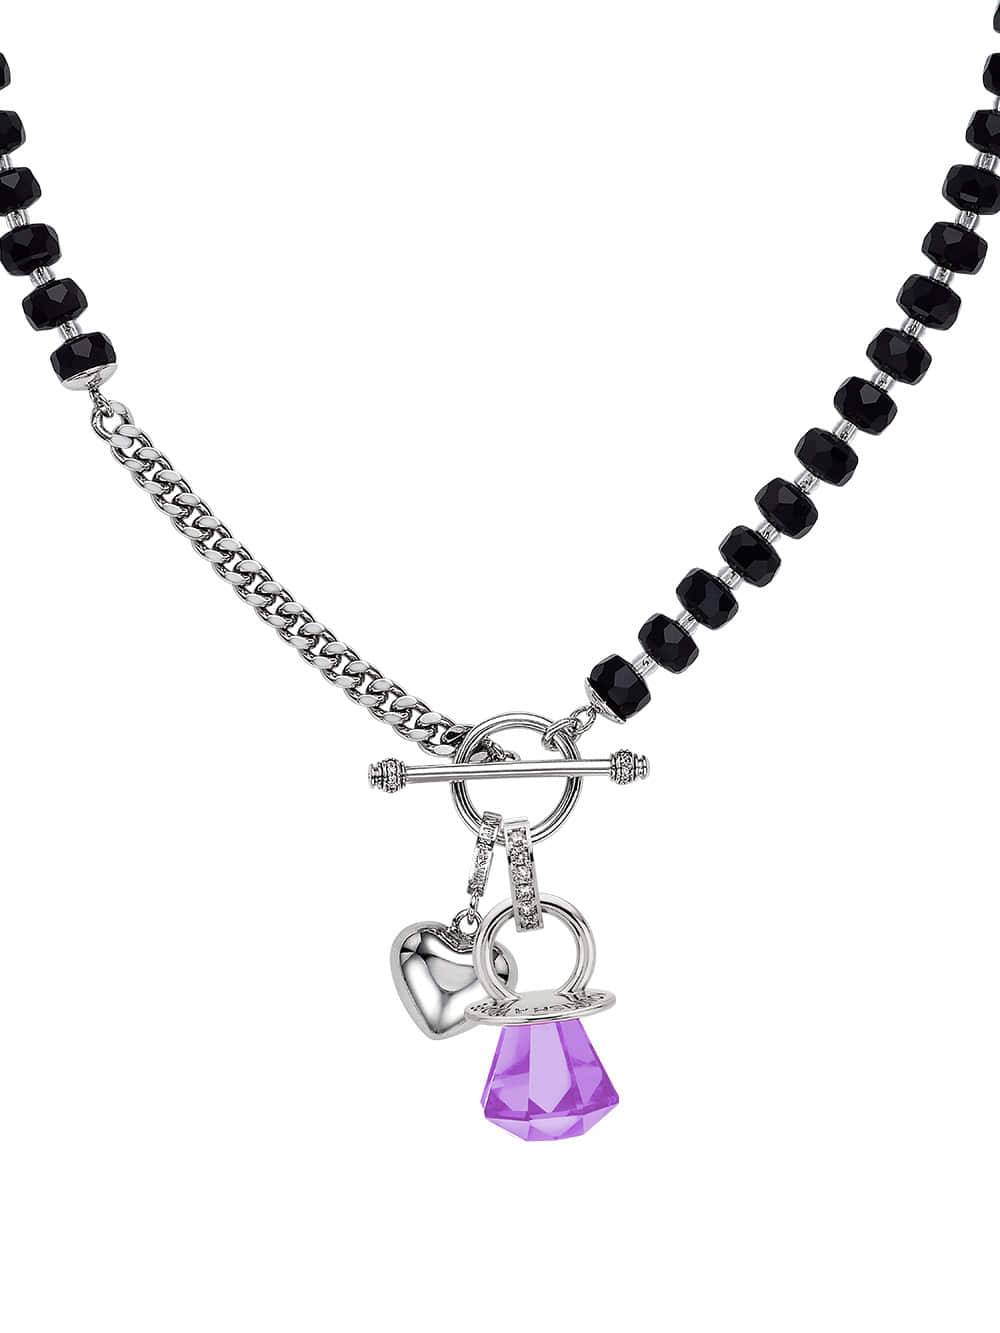 JEWEL CANDY CRYSTAL NECKLACE